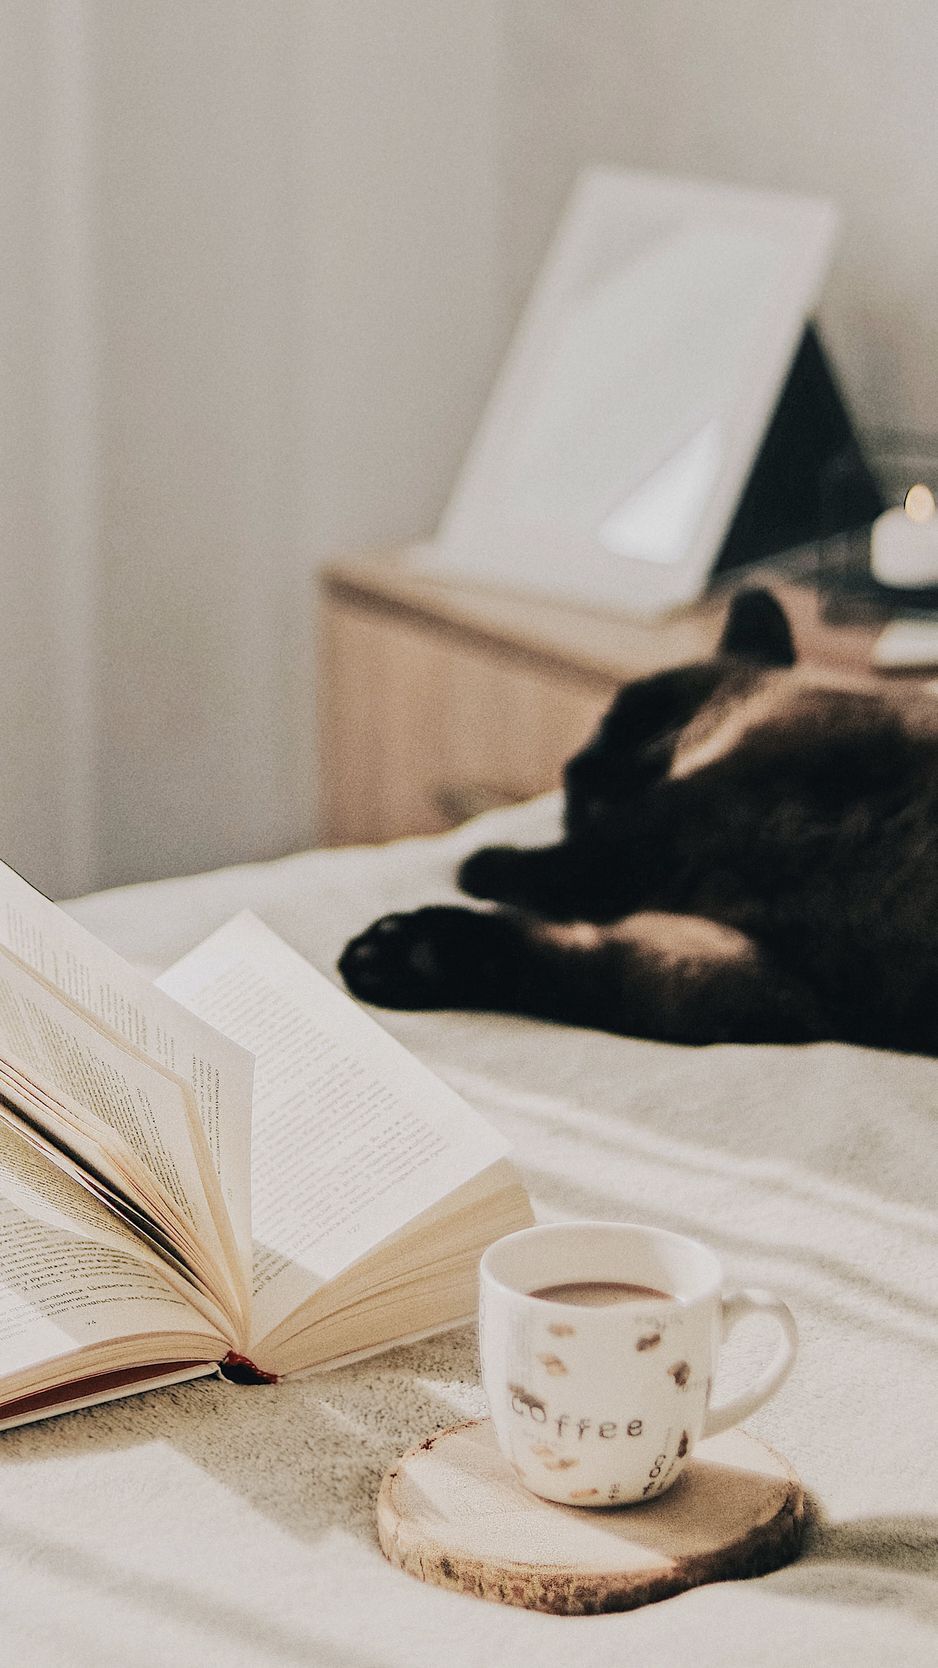 A cat laying on the bed with an open book and cup - Coffee